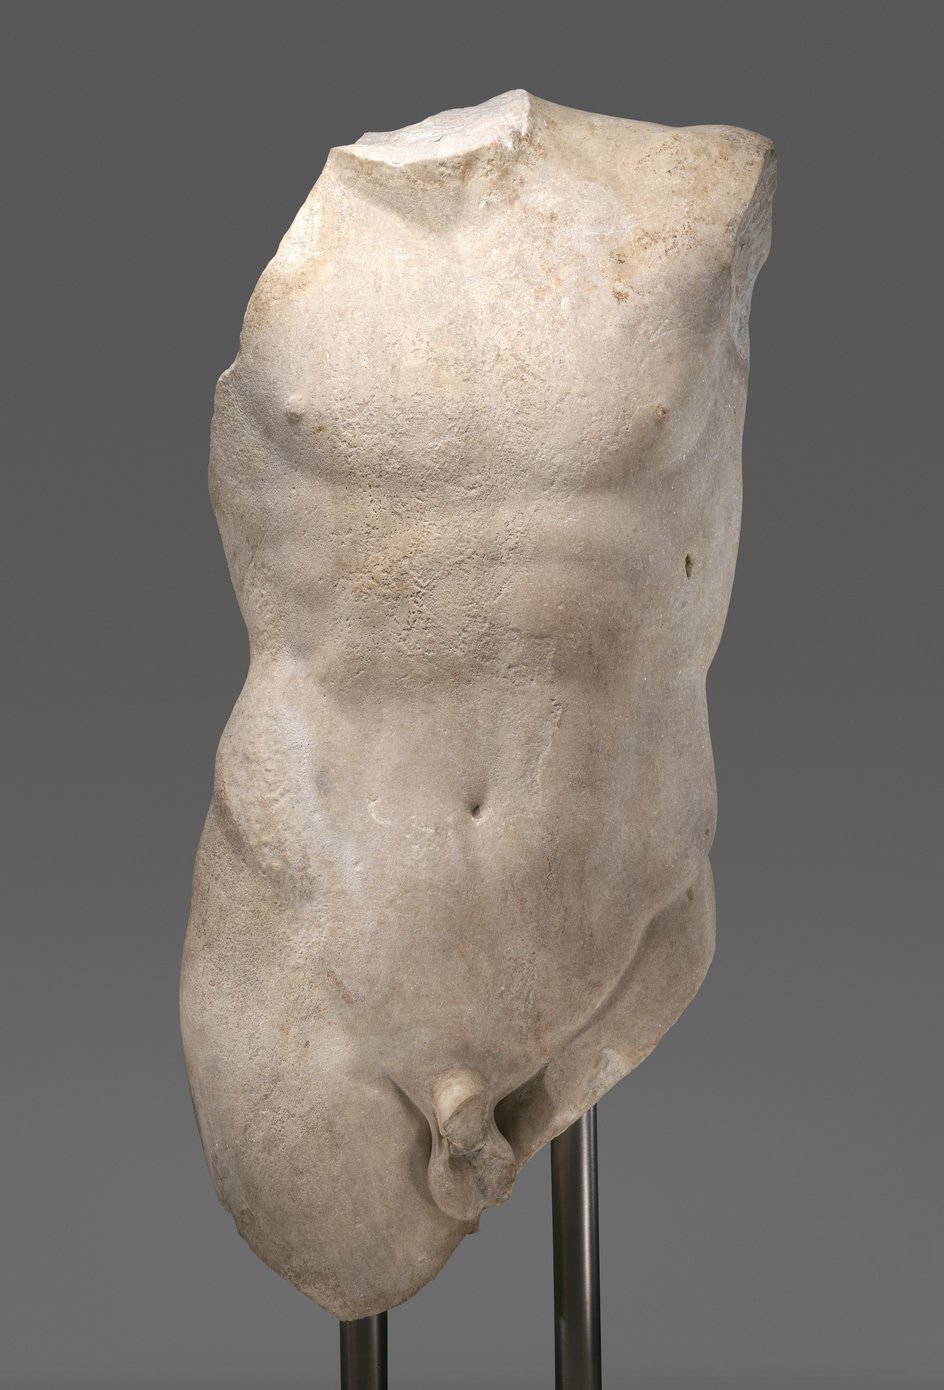 The torso of Apollo that stimulated Rilke to change his life